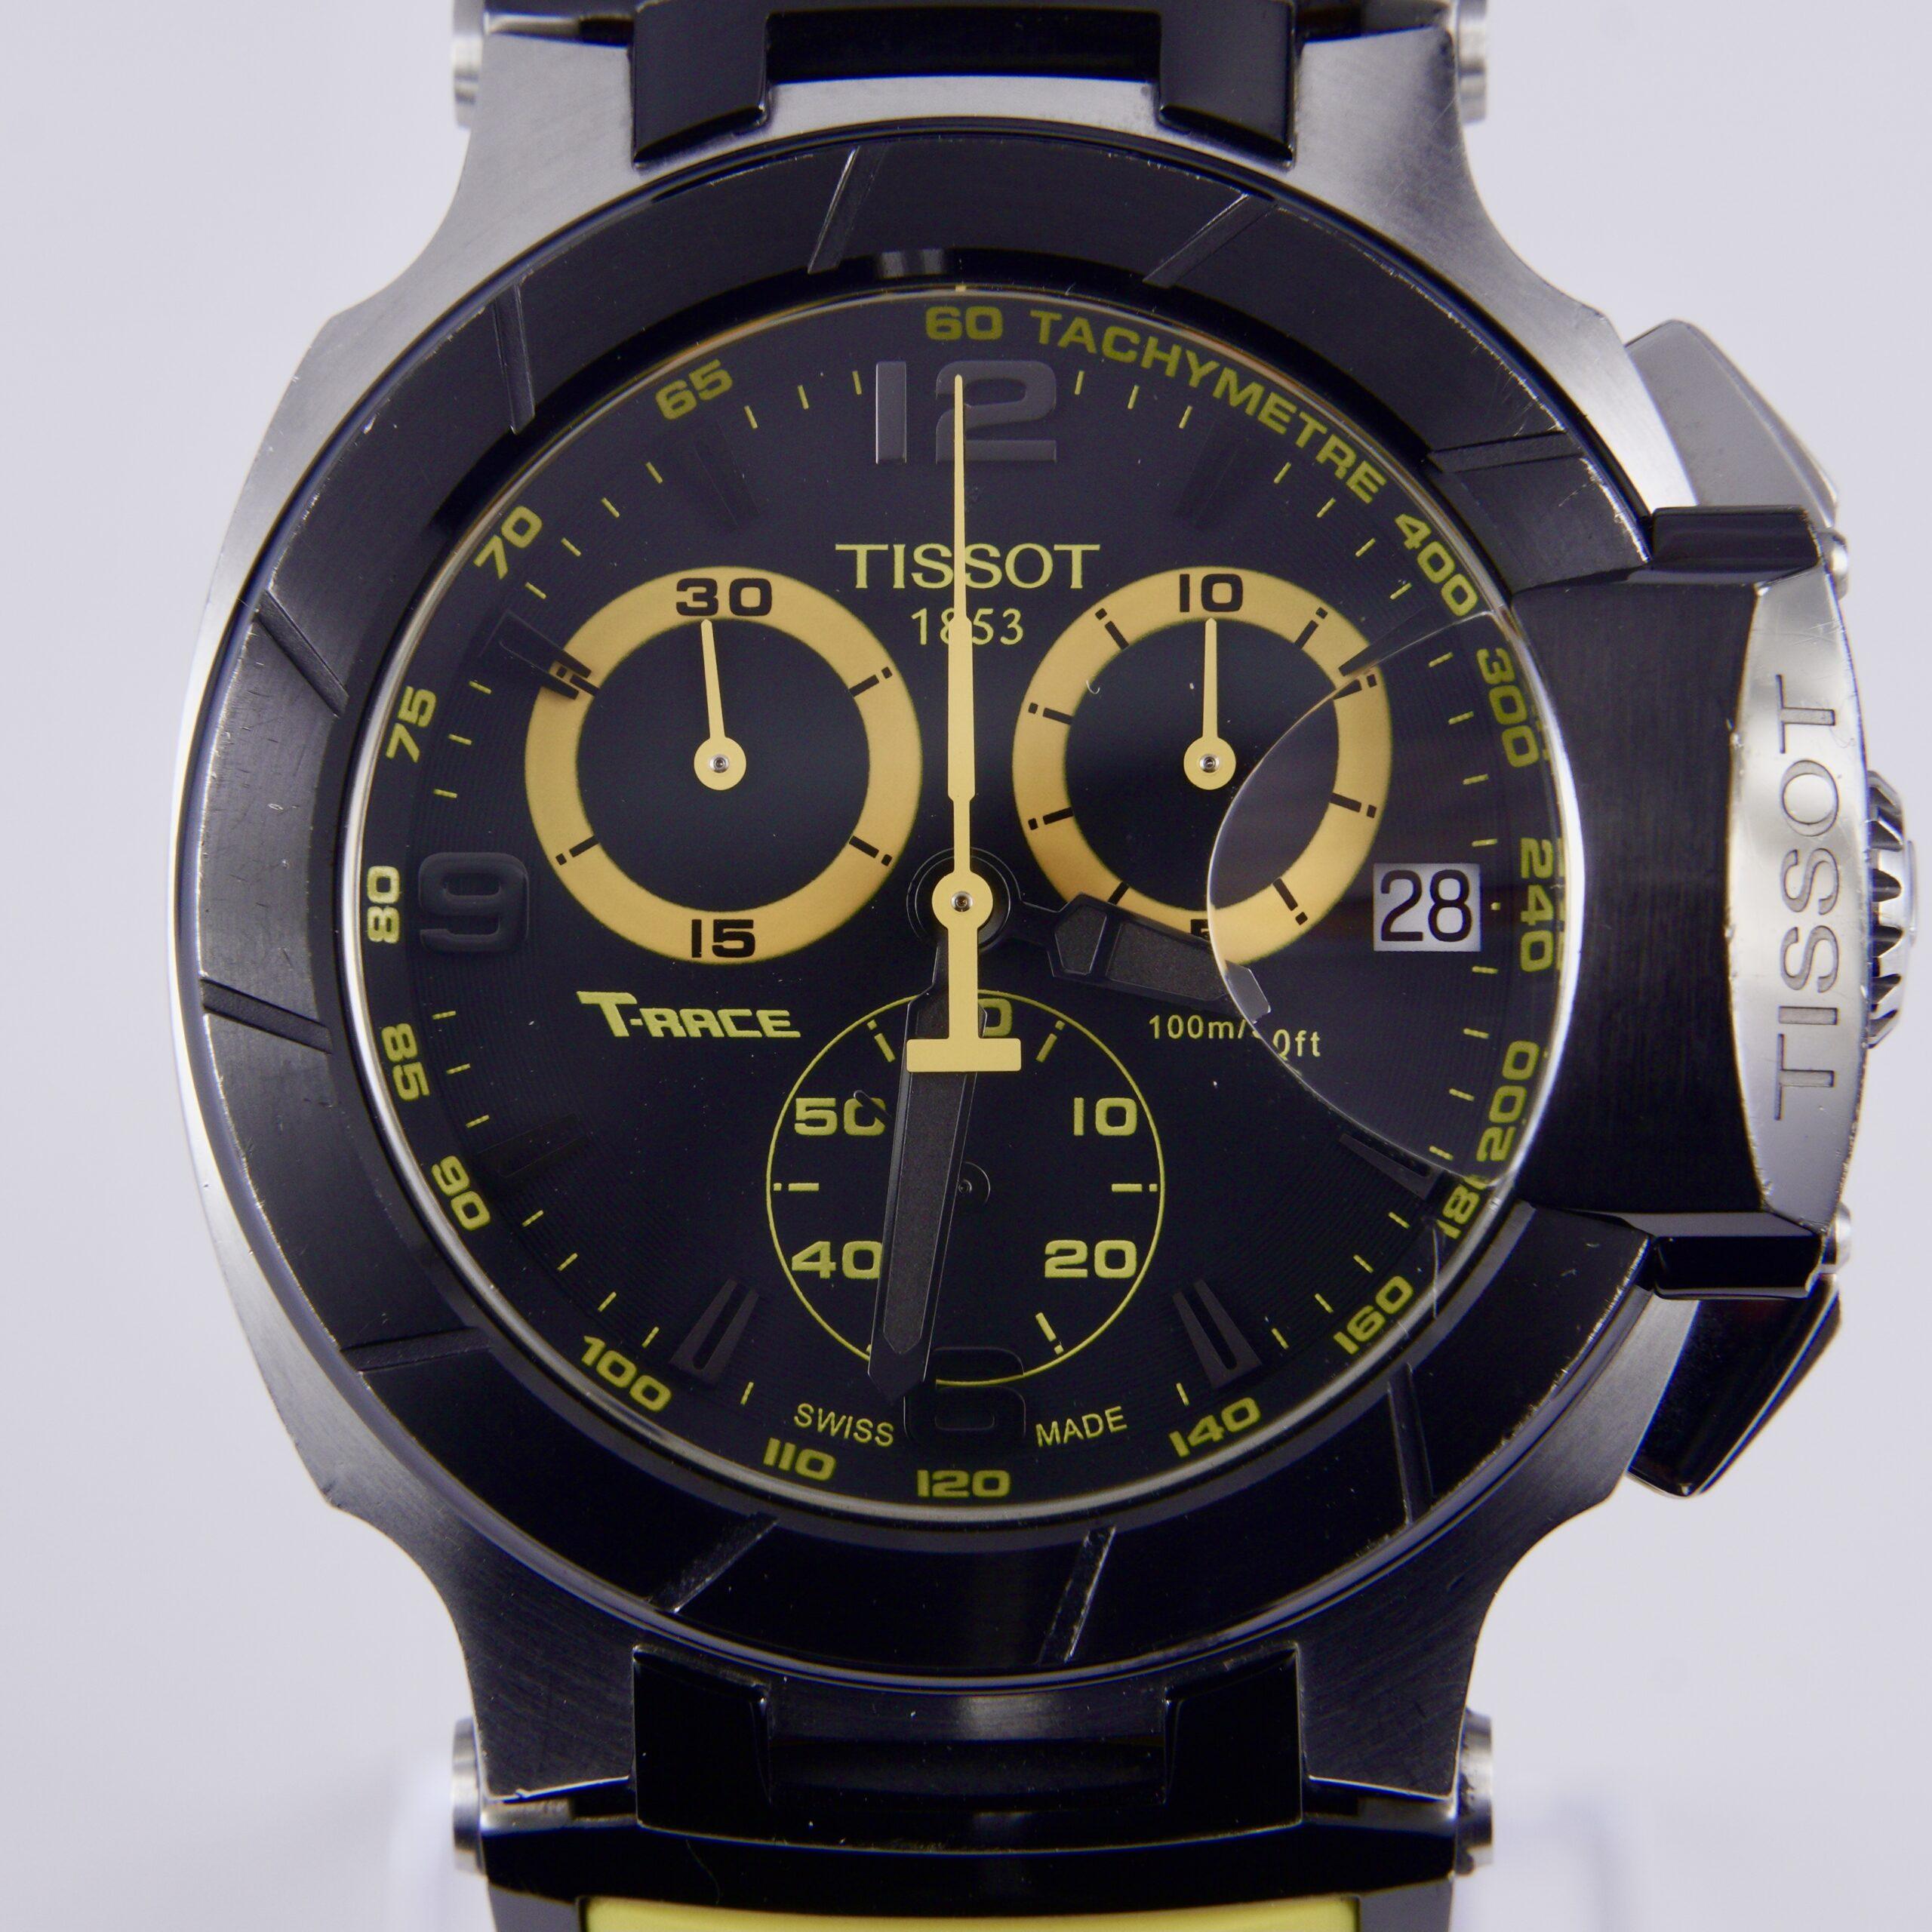 Tissot T Race T048417a Chronograph Yellow Band Watch Barry S Pawn And Jewelry